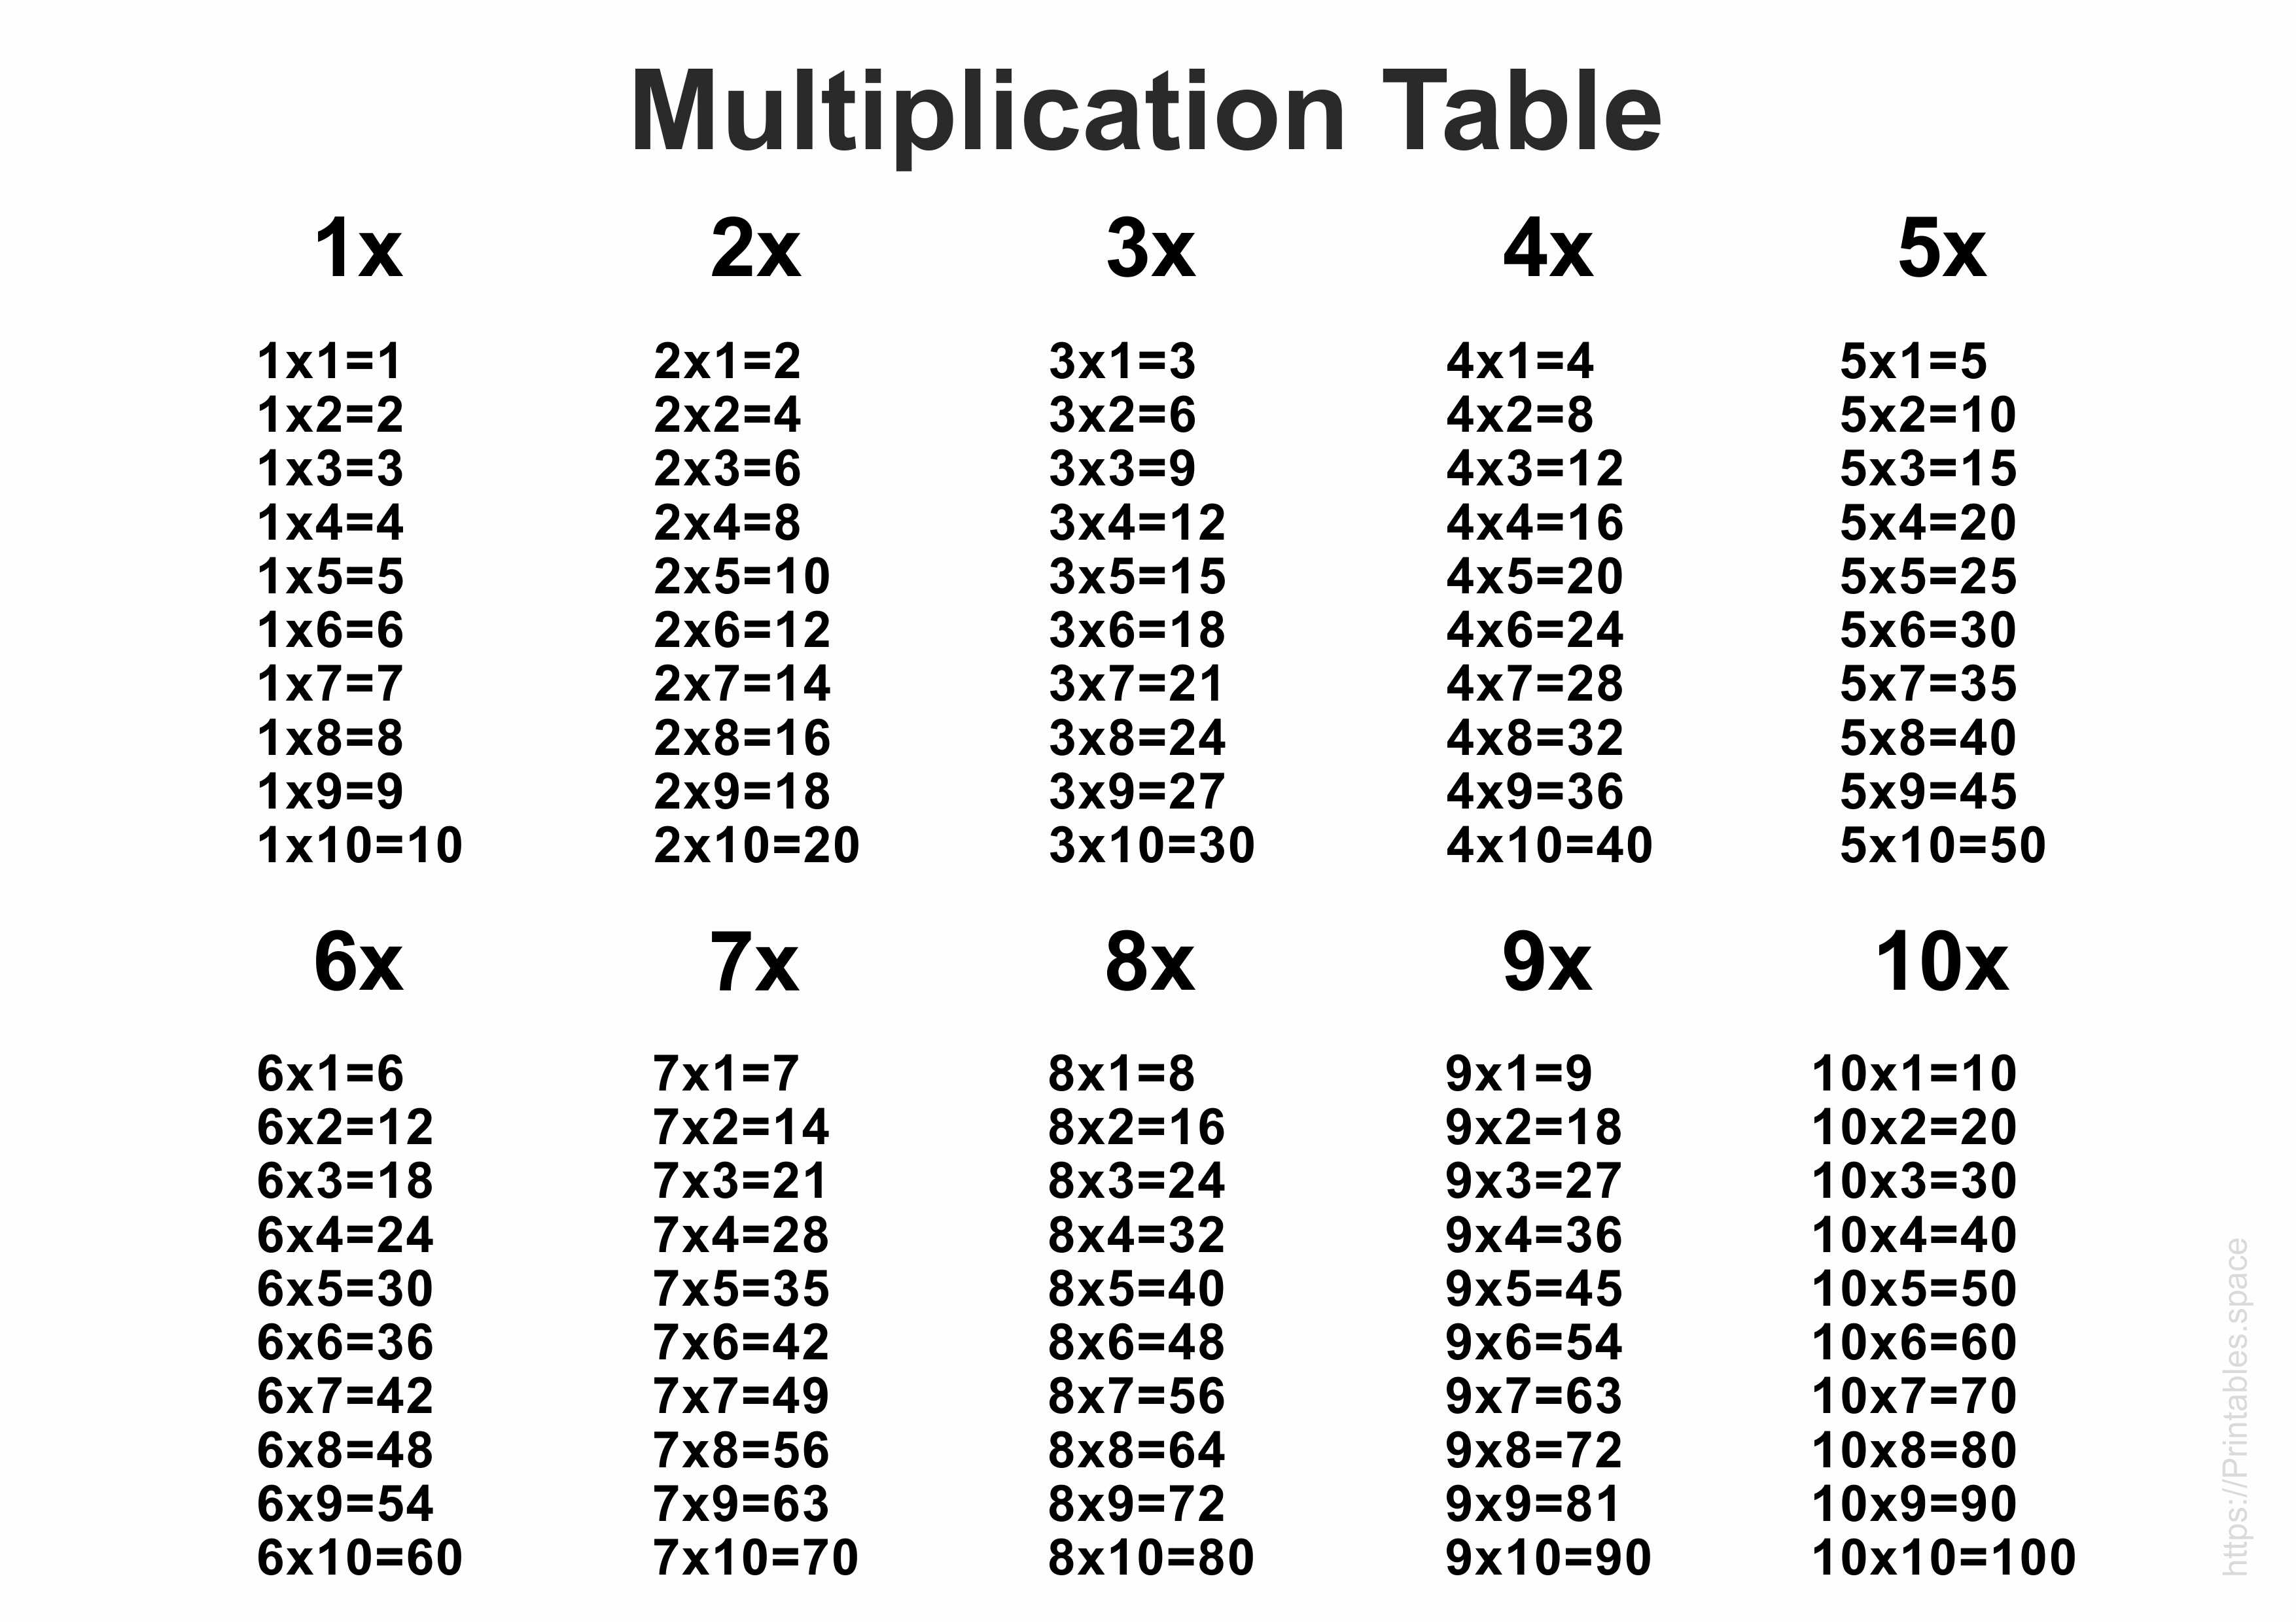 Multipication Table - Free Printable Template - Free Printables - Free Printable Multiplication Table